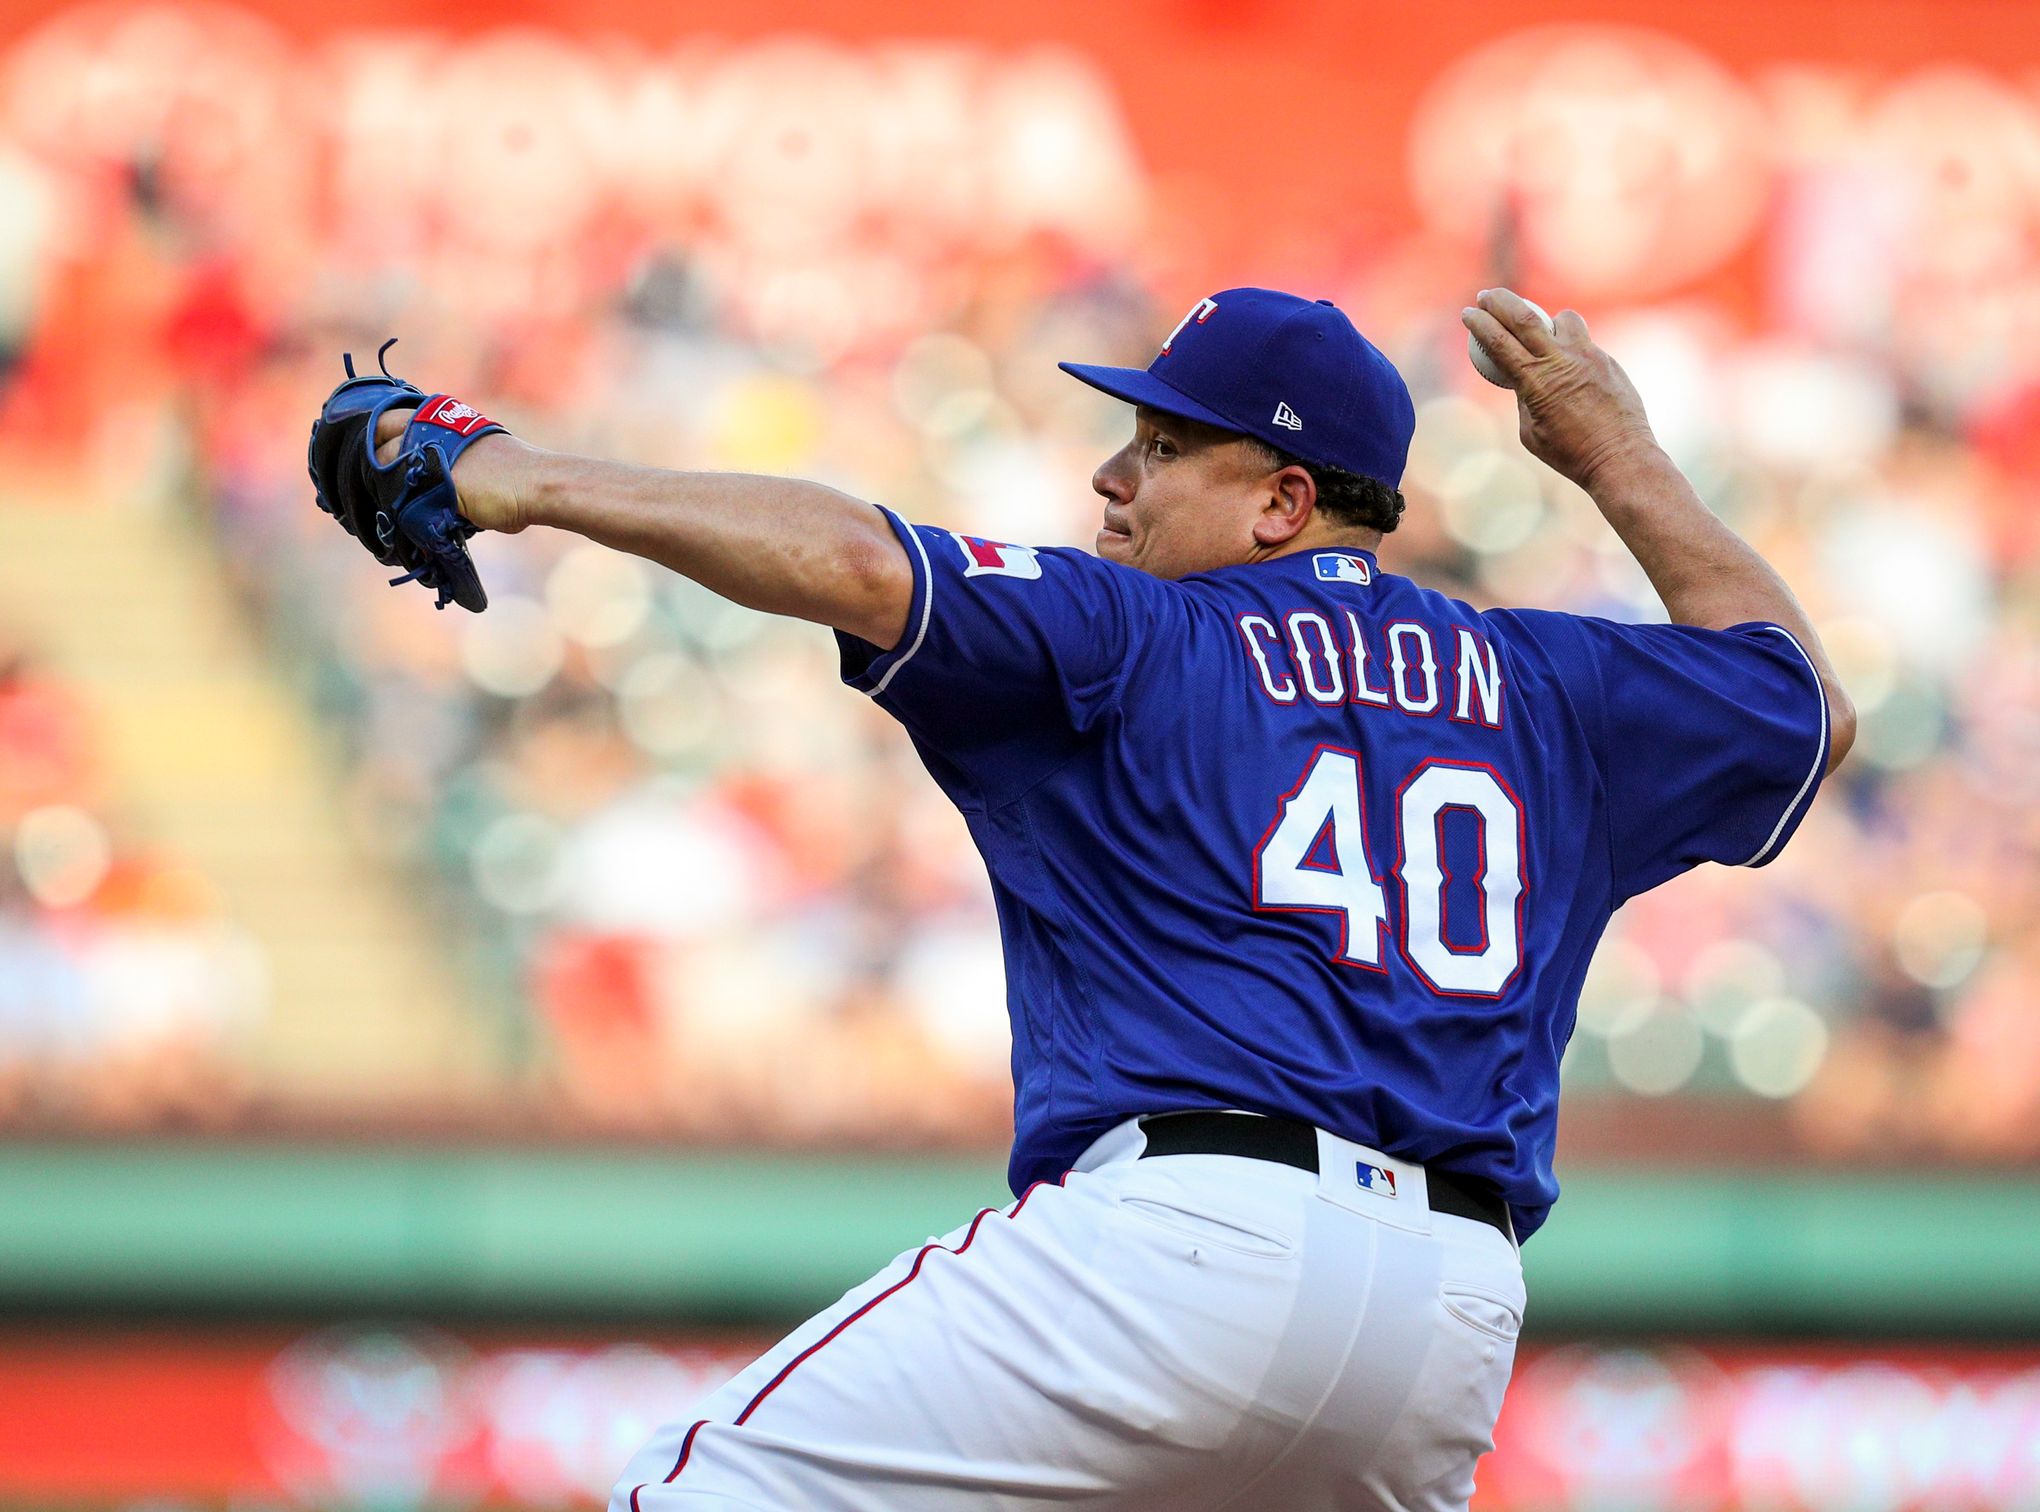 Bartolo Colon might have pitched his last game 